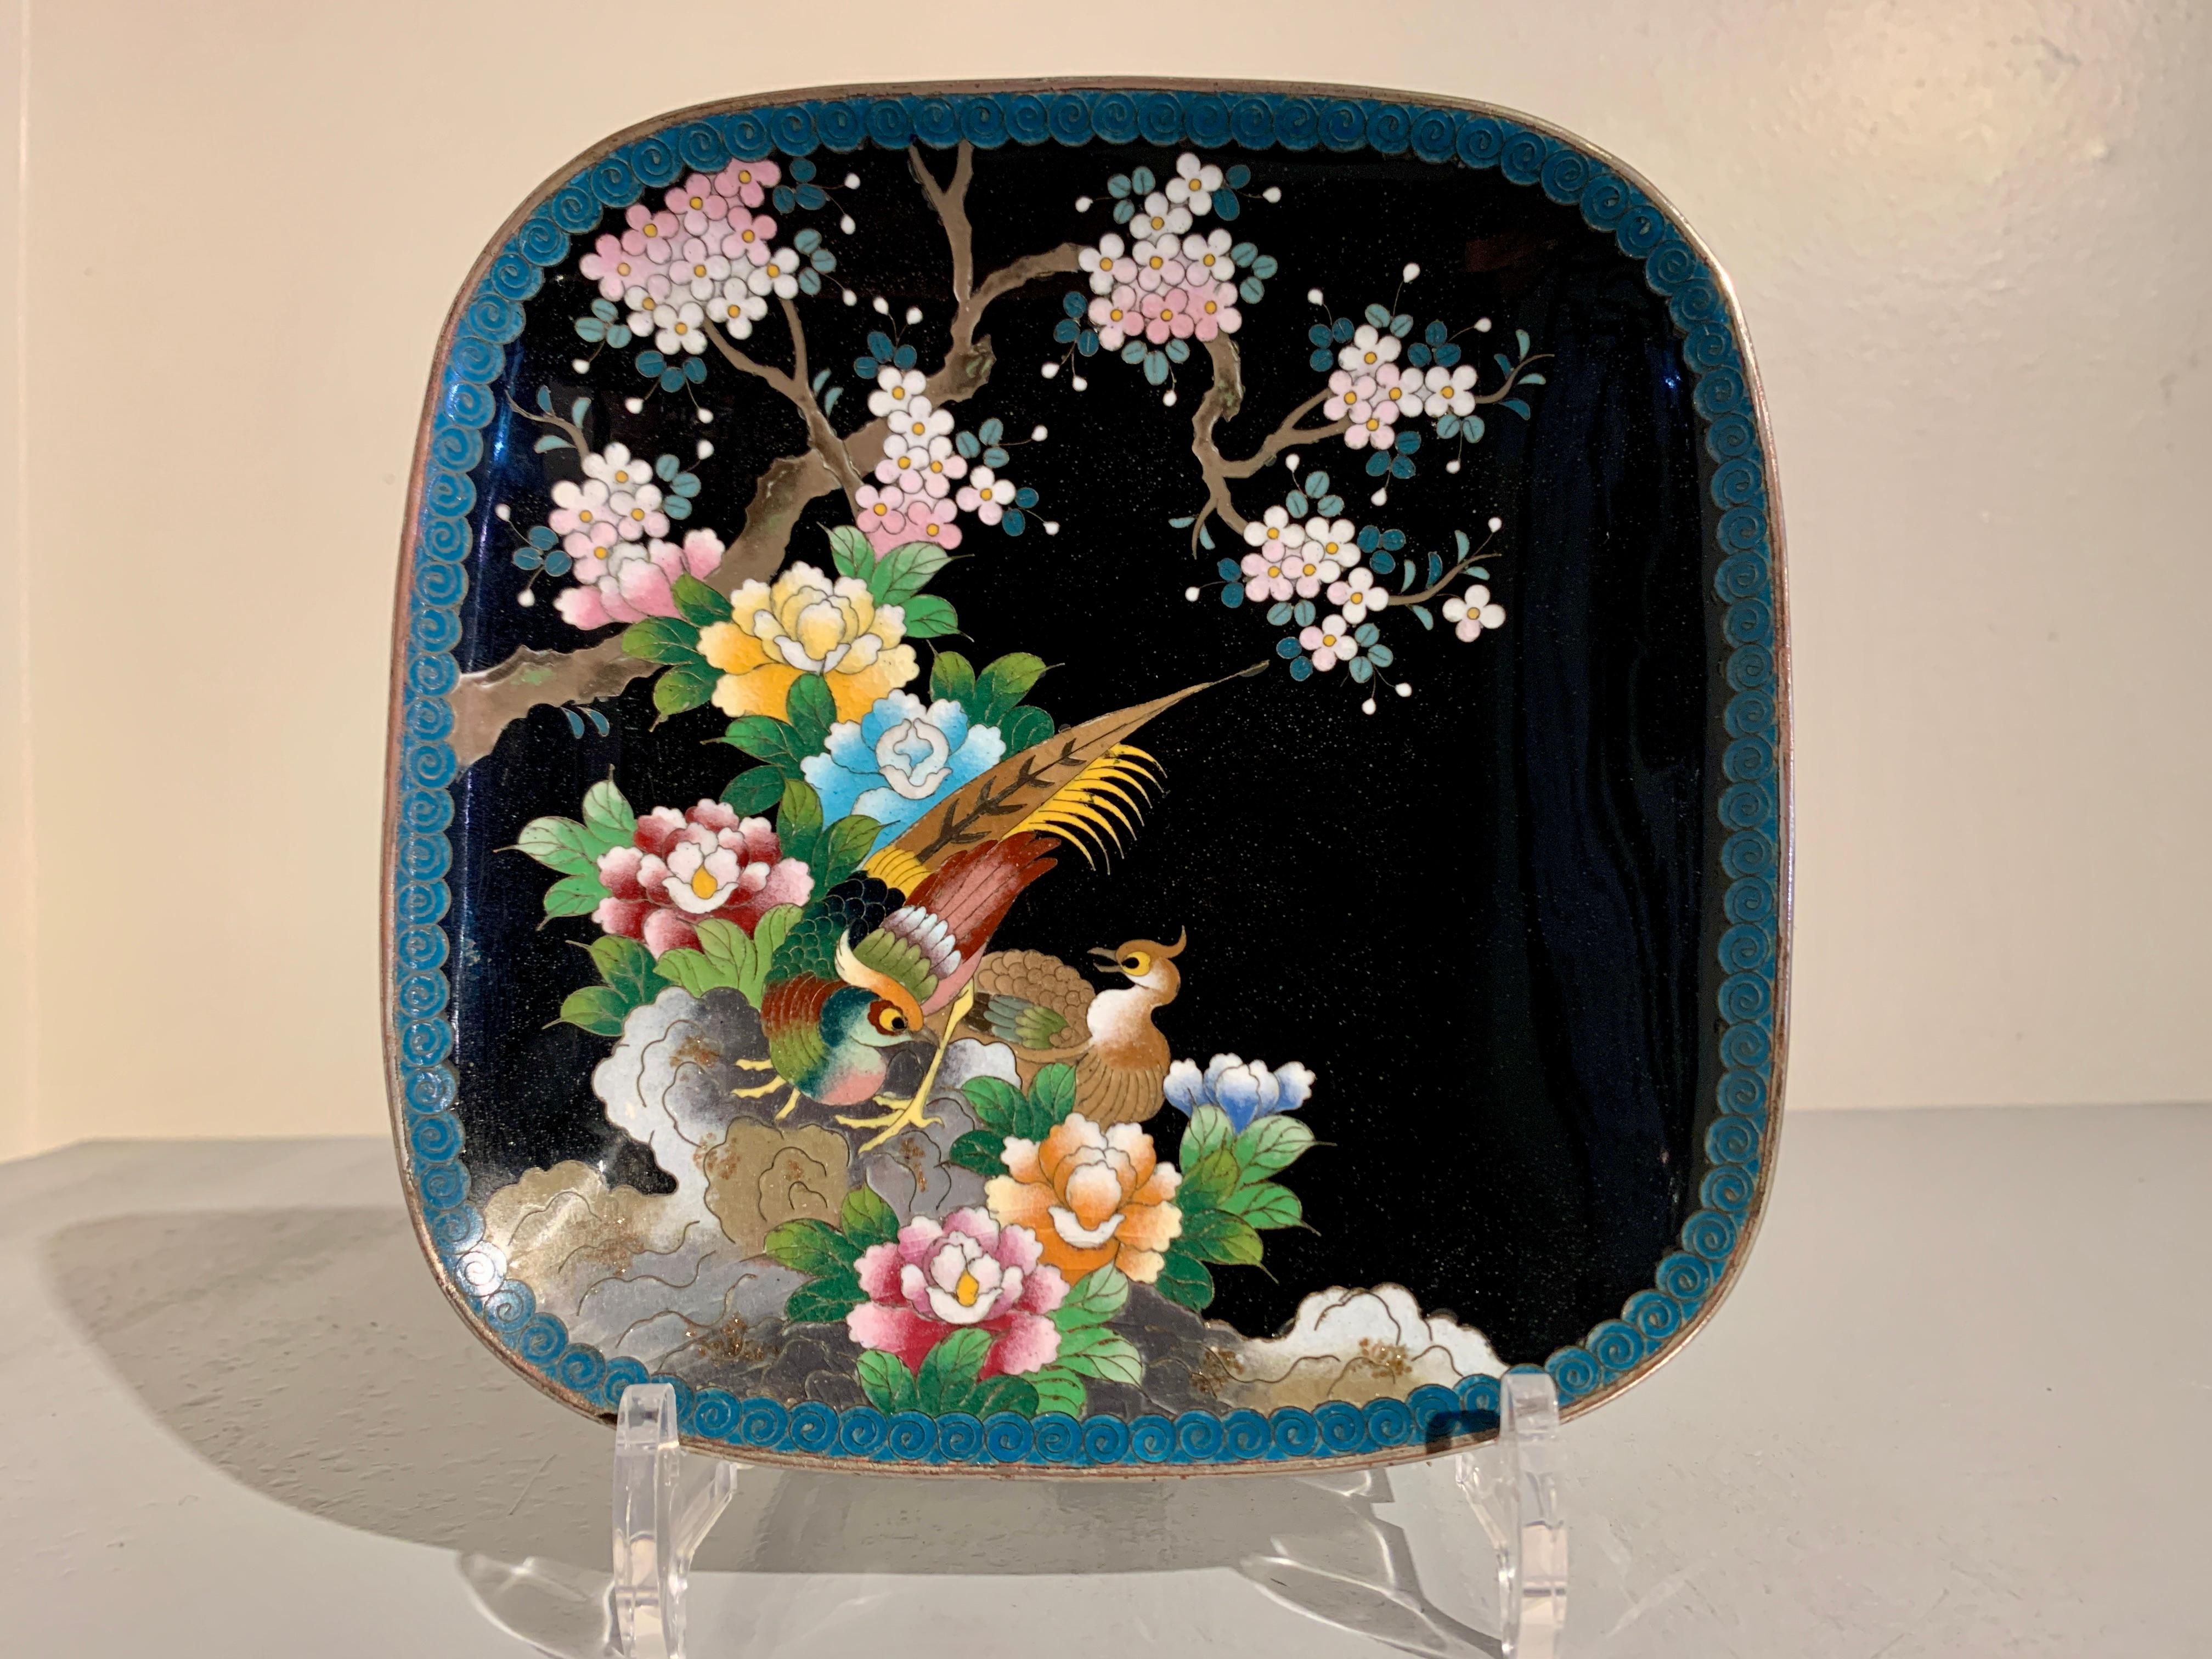 A lovely Japanese black ground cloisonne enamel square dish by the Inaba Cloisonne company, Meiji Period, circa 1900, Japan.

The square dish features rounded corners and a gently sloped sides, giving it a softer profile. The dish is decorated